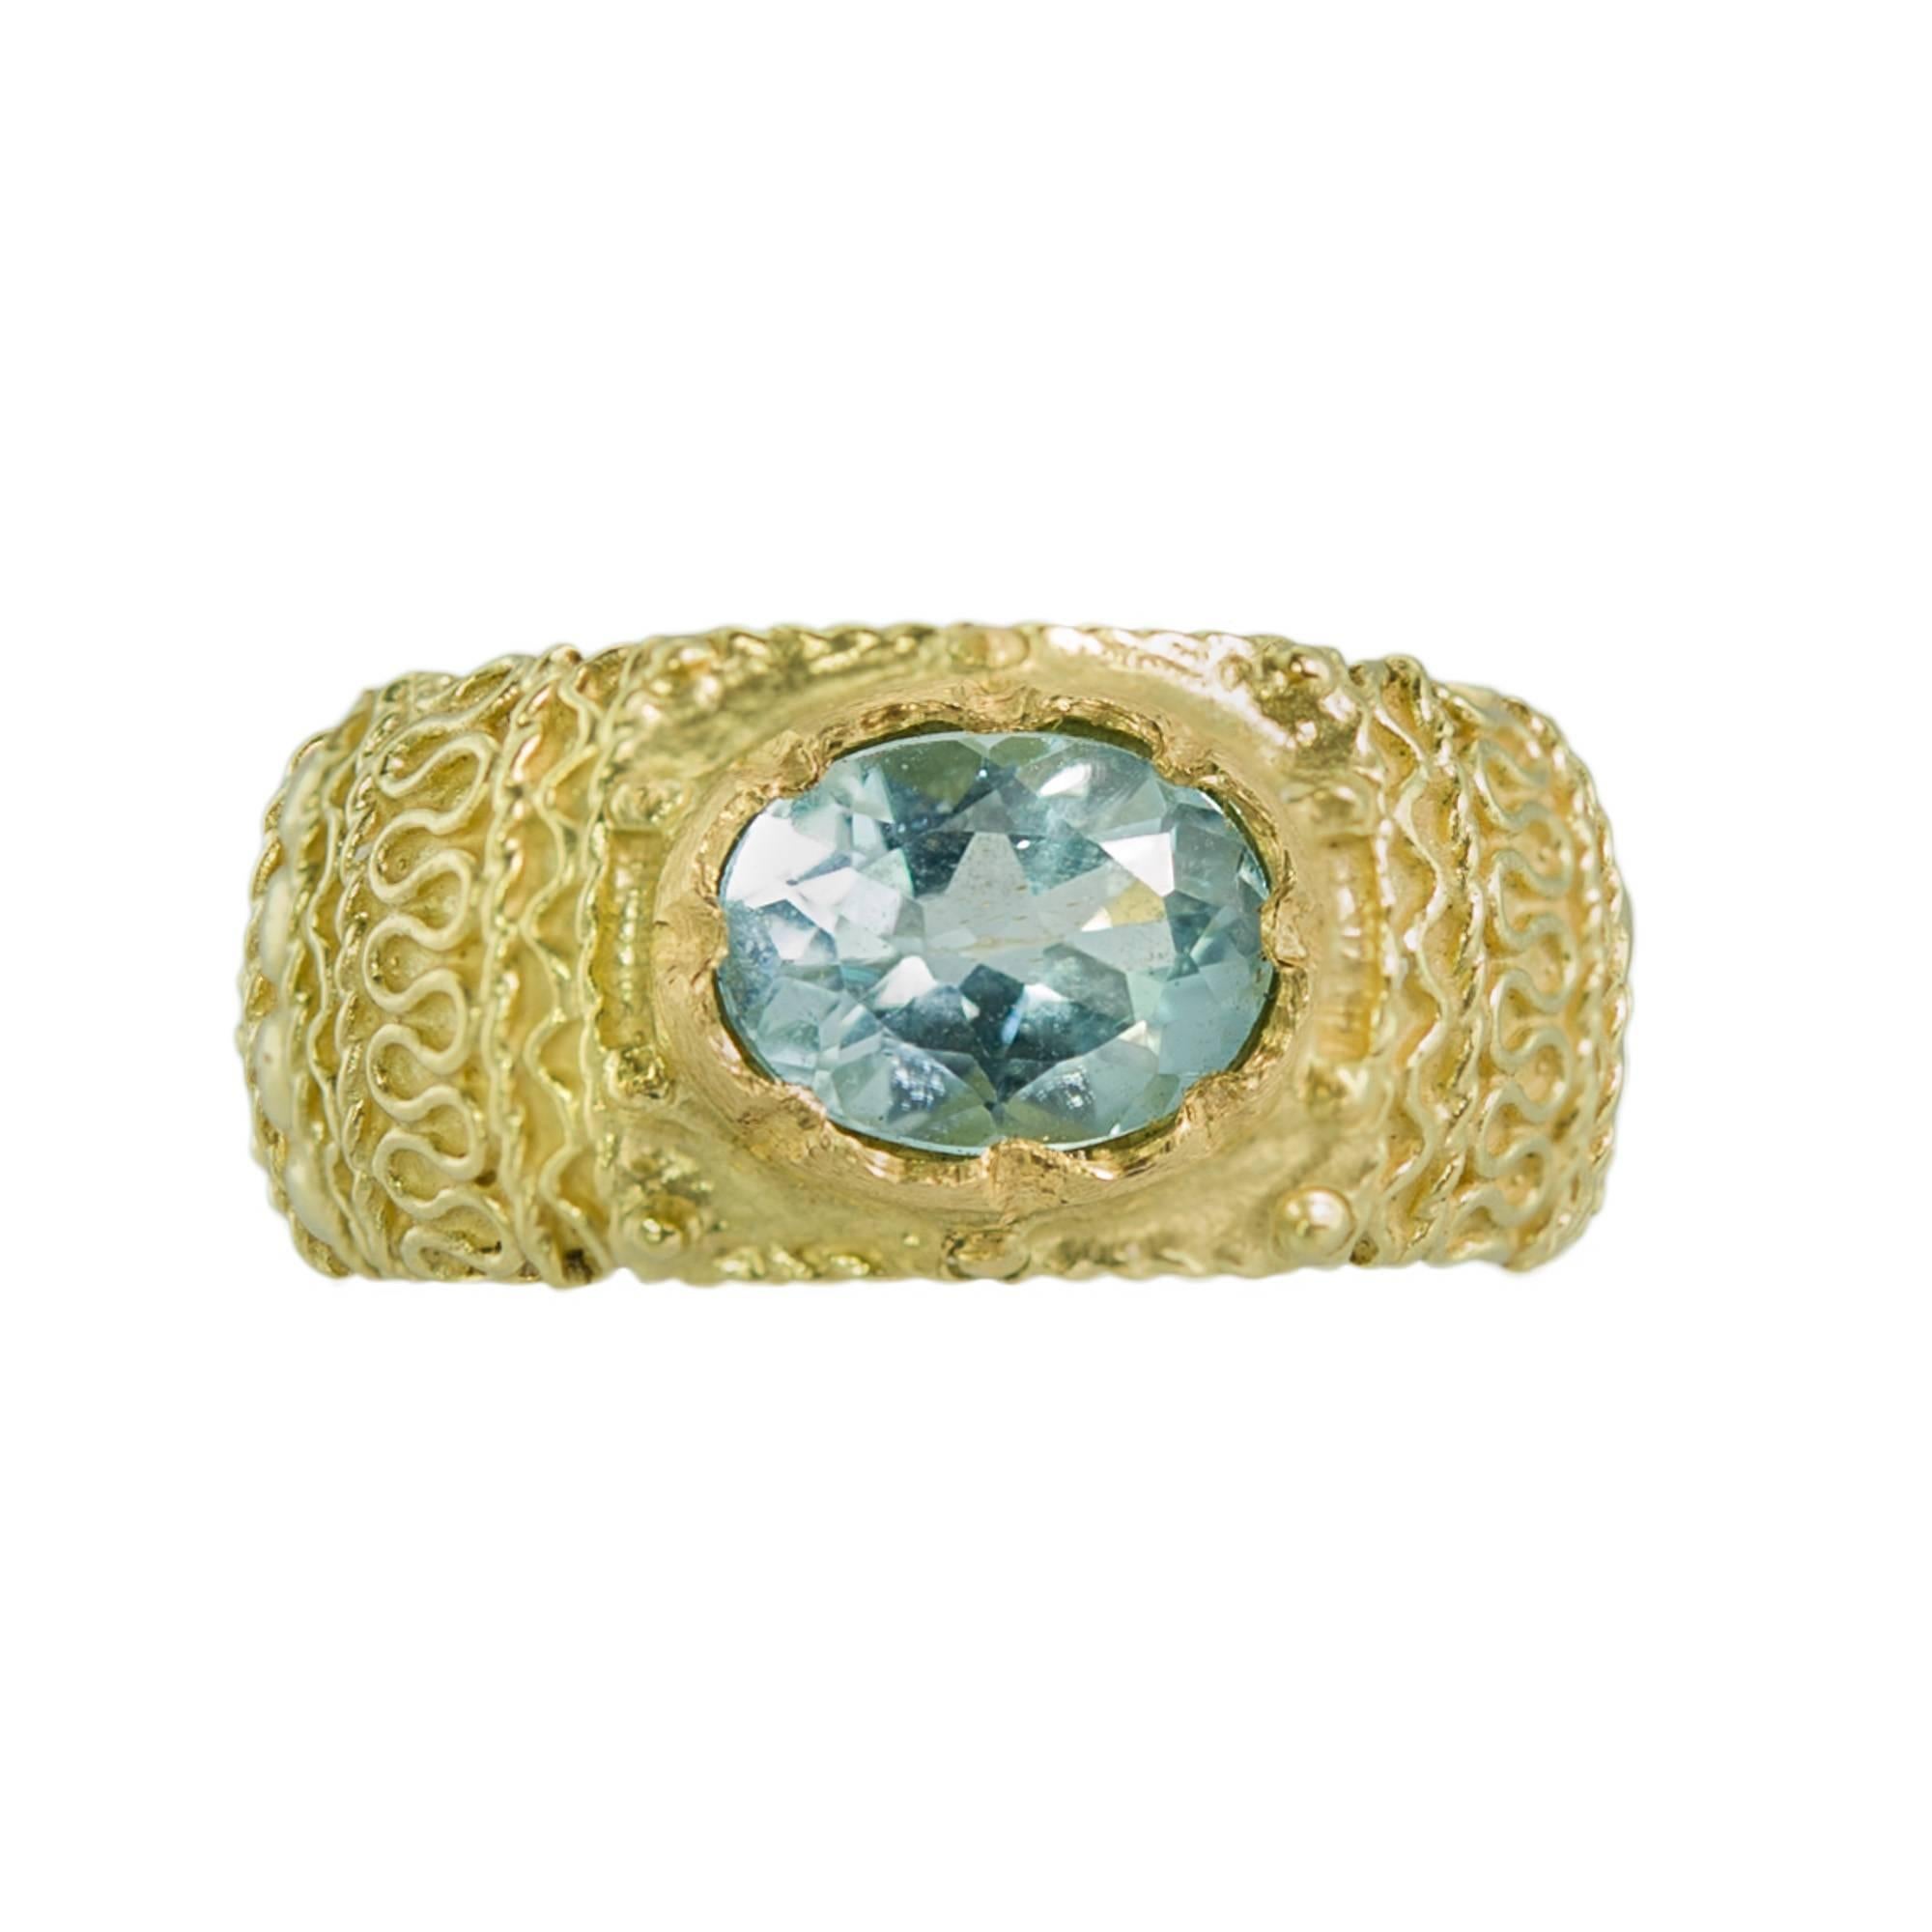 18K gold ring and blue topaz.
Band with crescents and knurling, with the stone at center.
Lost-wax casting and embedding of stones.
Possible engraving at no extra cost.
Handmade.
